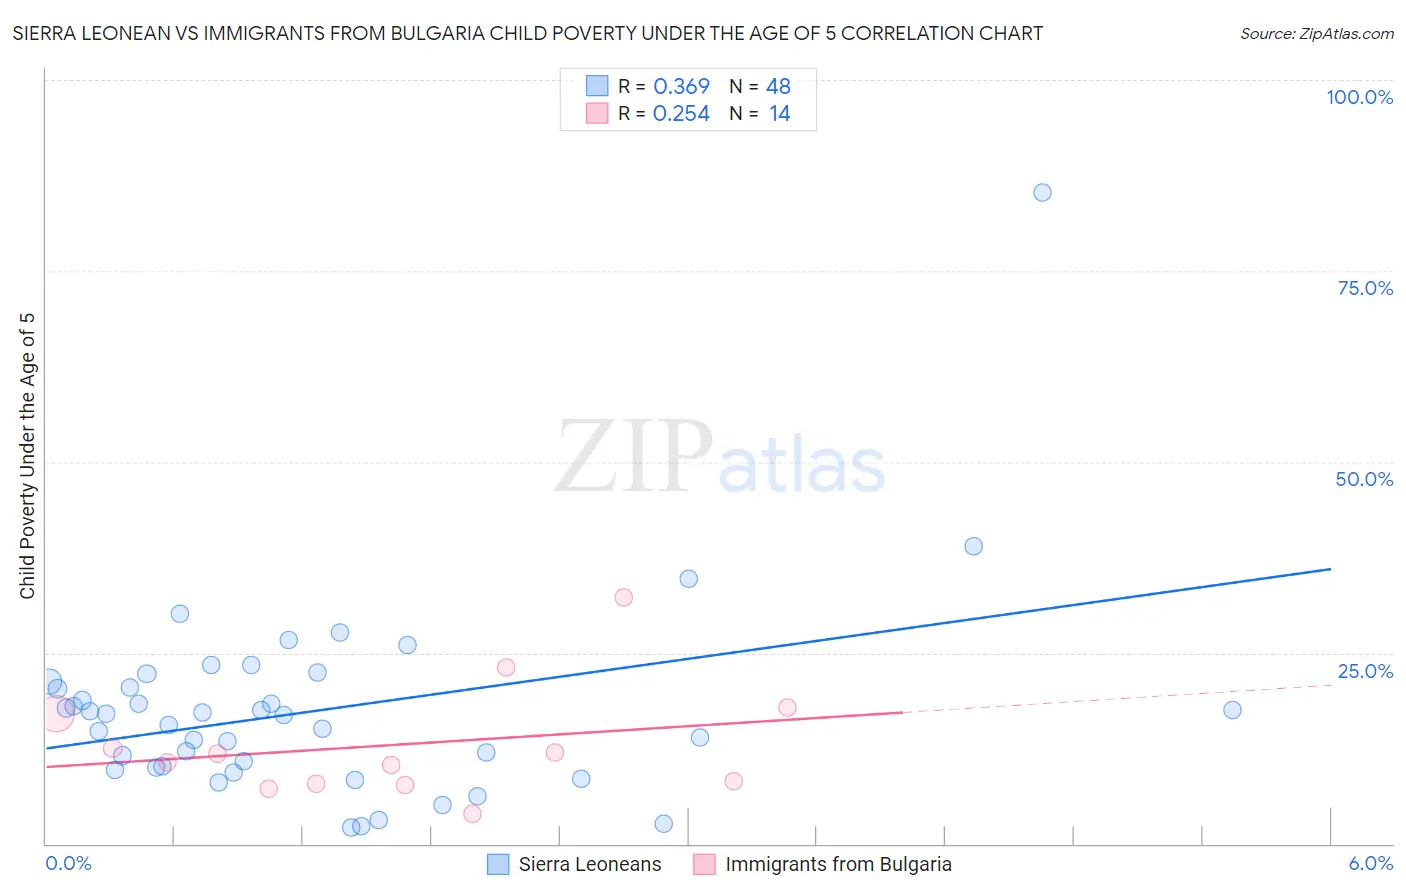 Sierra Leonean vs Immigrants from Bulgaria Child Poverty Under the Age of 5